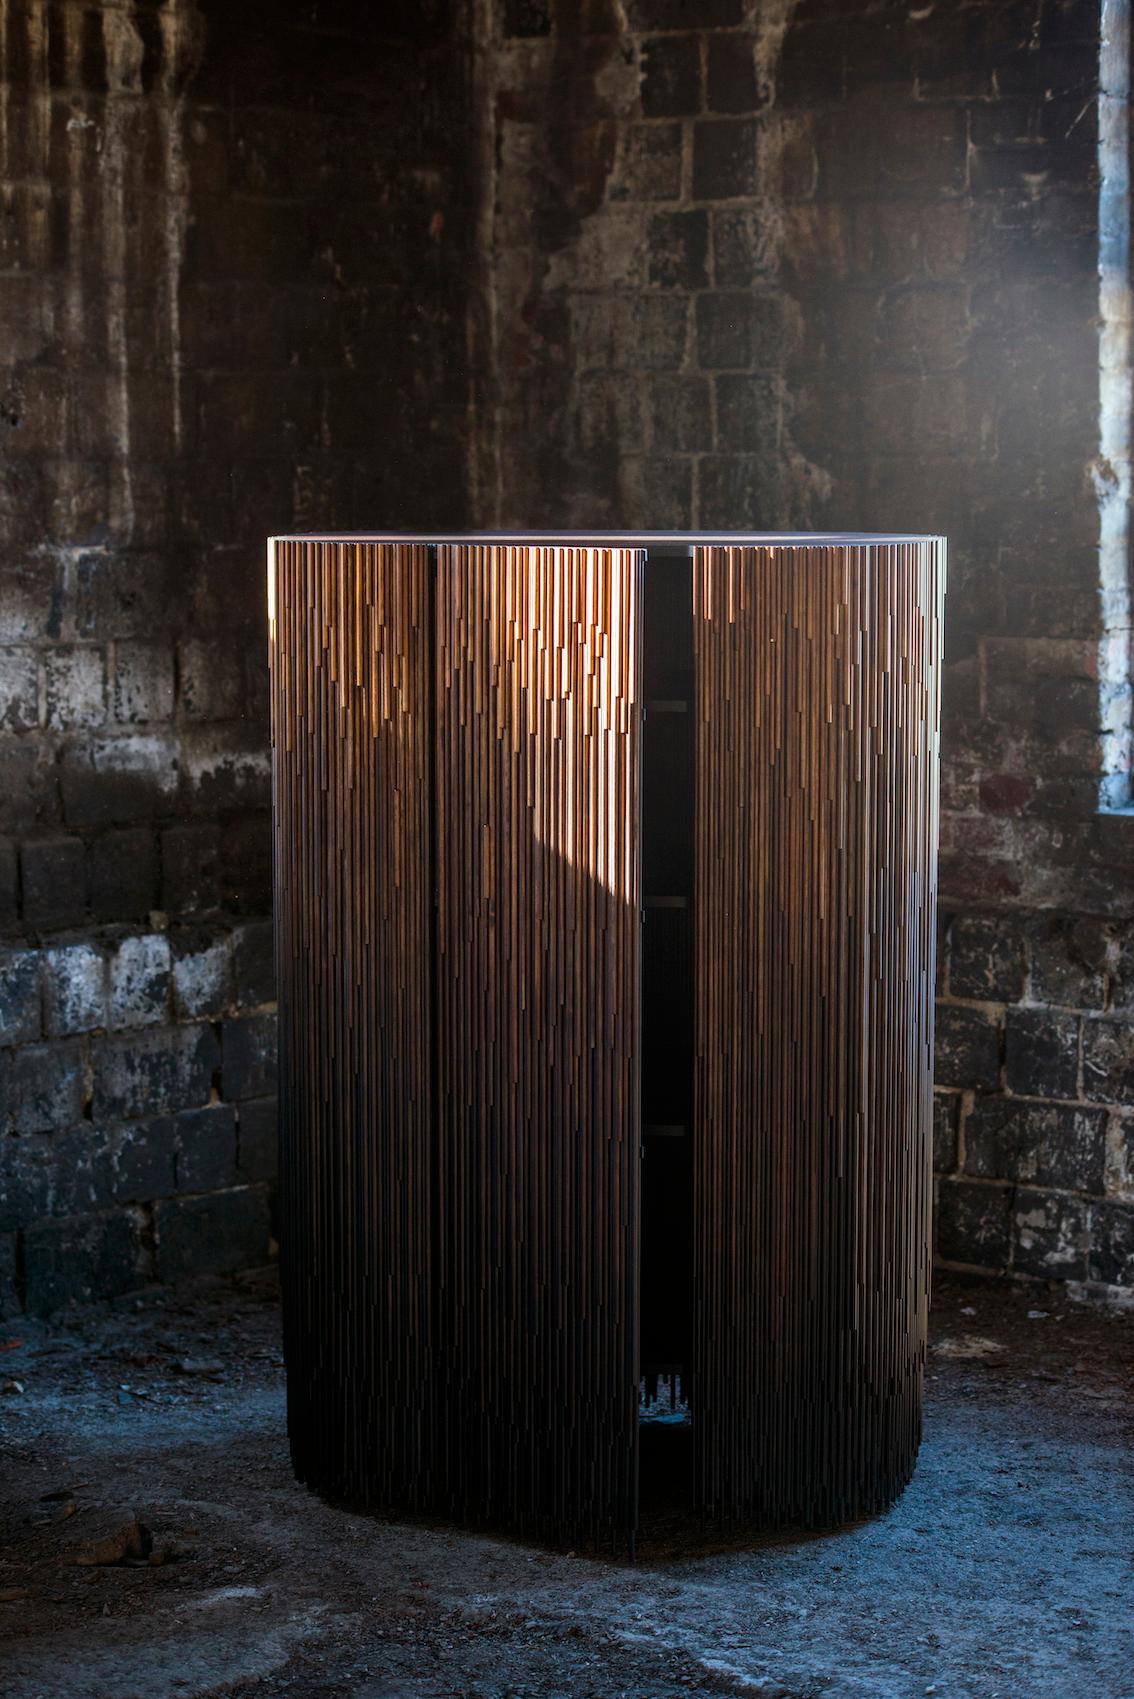 In the MELT cabinets industrially treated pine transforms into an unique art composition. The cabinet has been inspired by metamorphosis of the movement of water. By melting the ice again becomes liquid like rain.

Surface of the cabinets is built